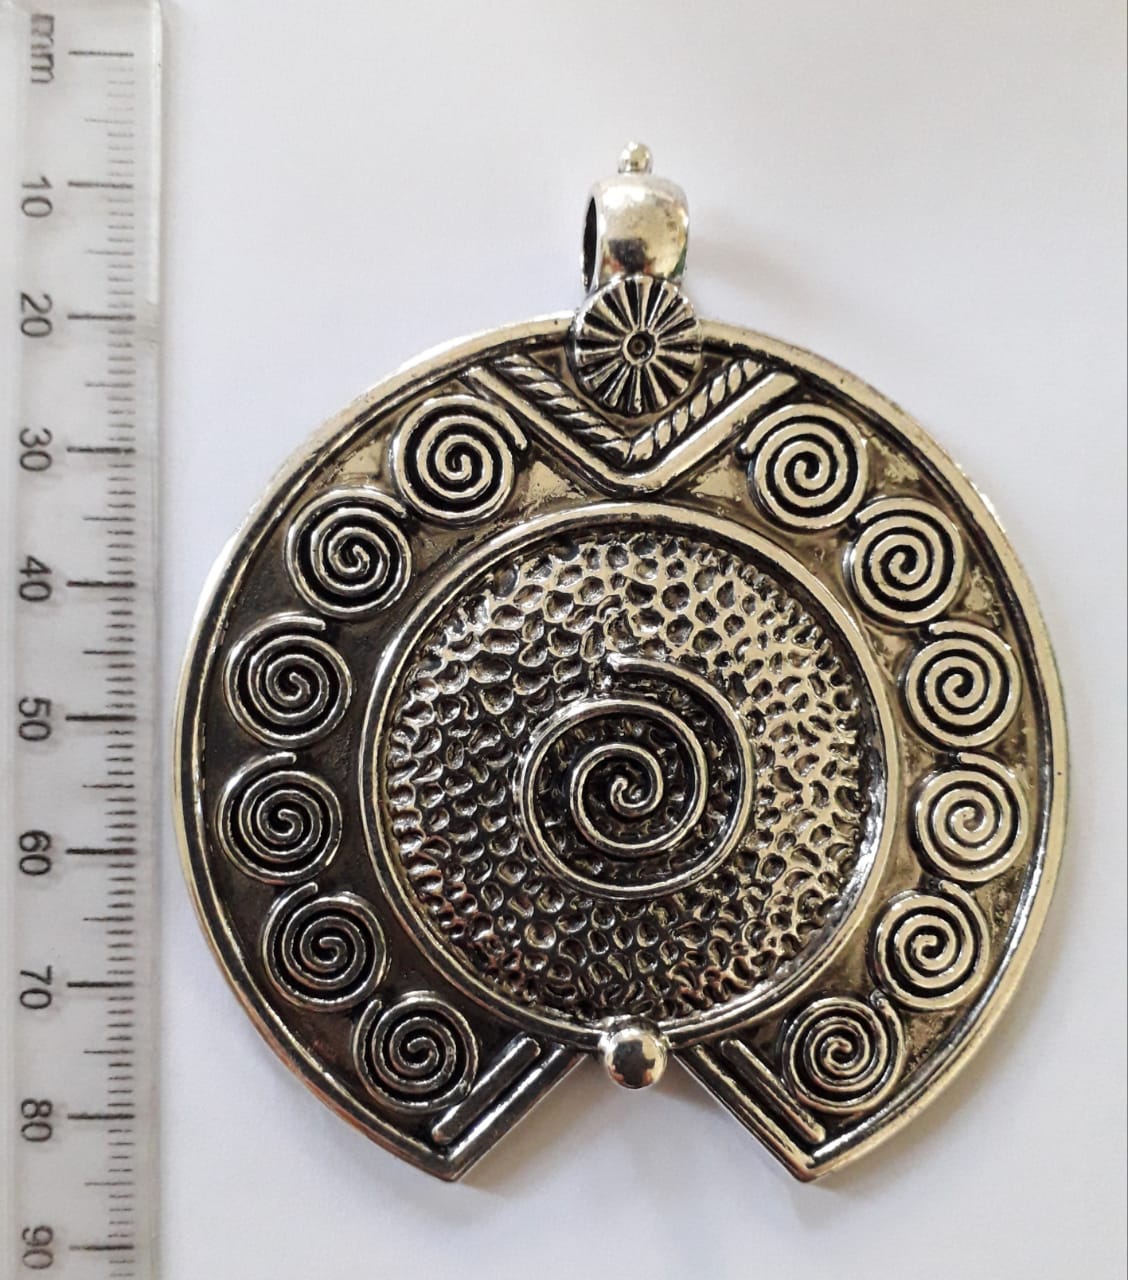 75mm Circular Pendant with Abstract Design (each)